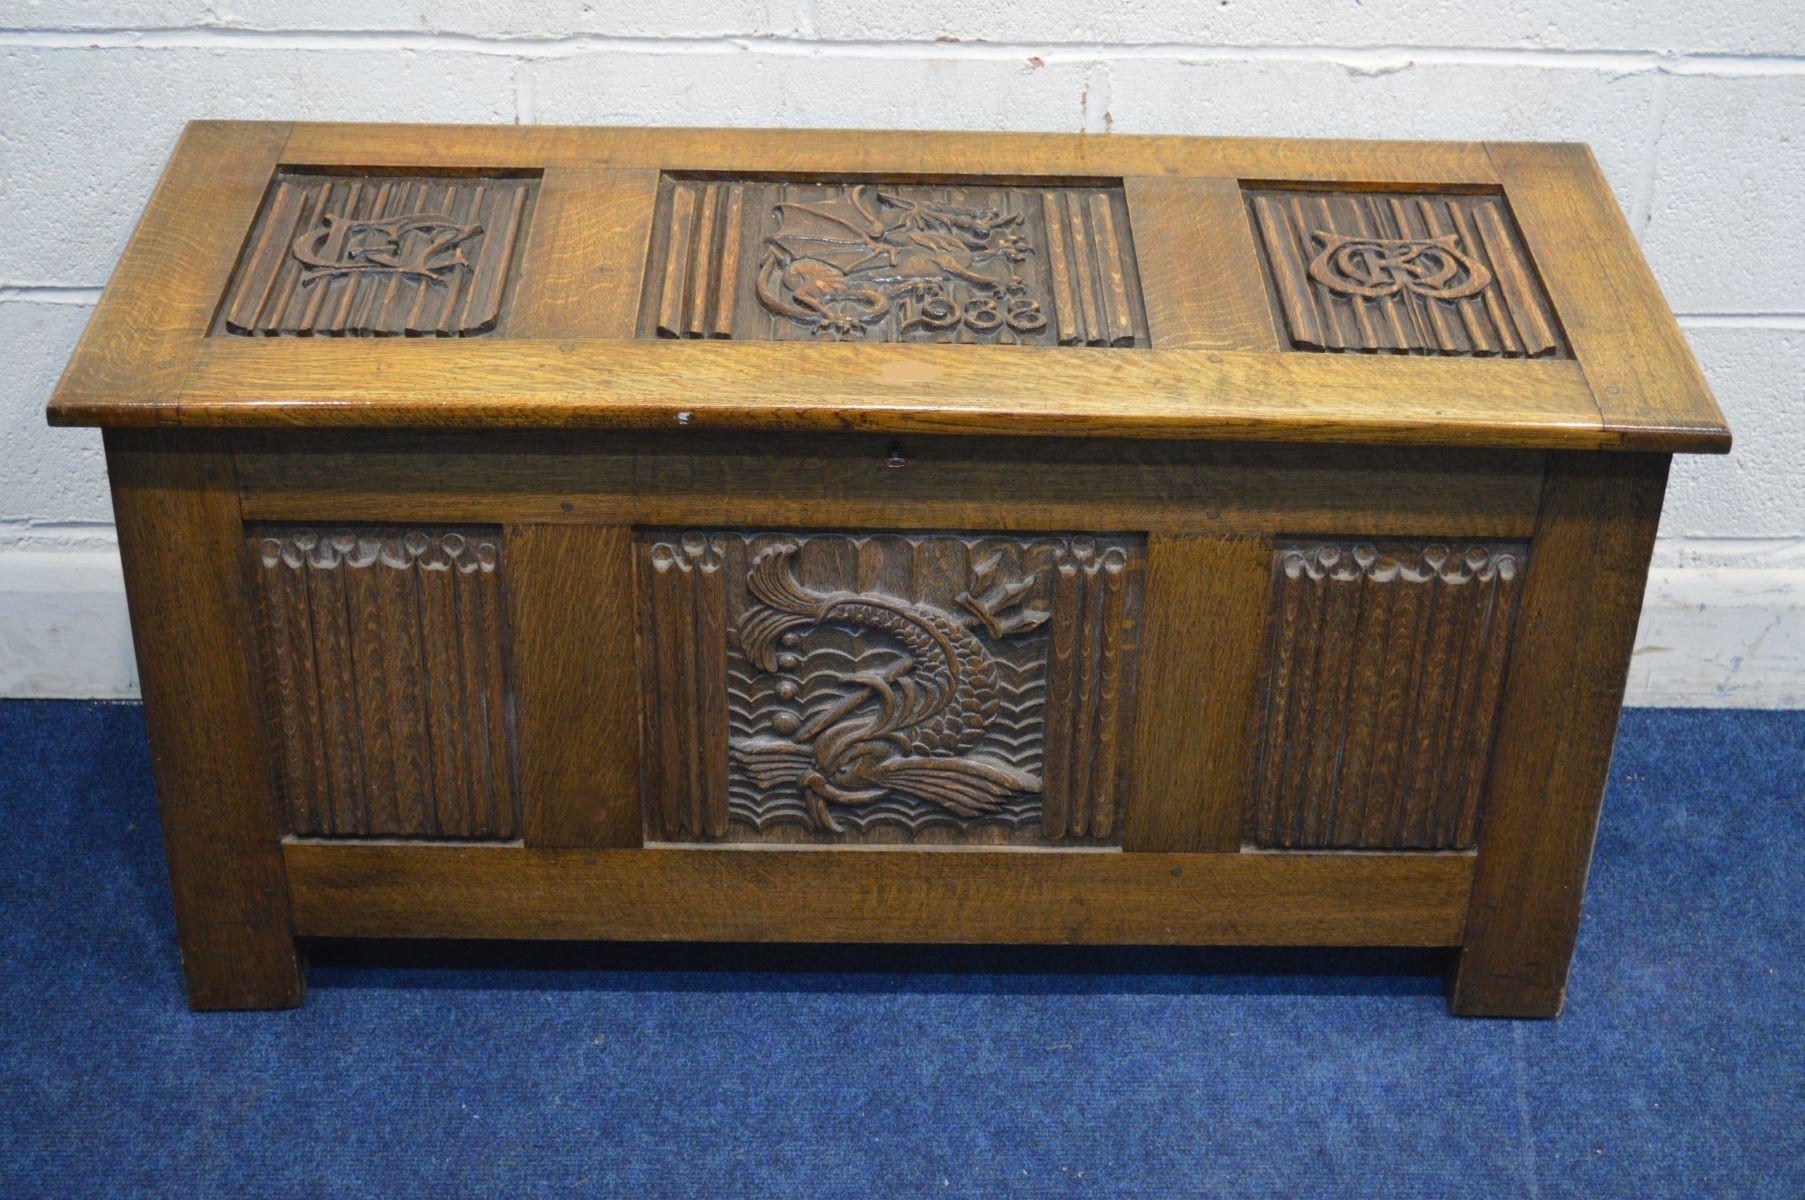 An English Arts & Crafts oak blanket chest, with a beautifully carved dragon to the top and dated 1938, flanked by two carved initials set in linenfold carvings. The initial on the left is possibly GCL, and to the right possibly MKM but any